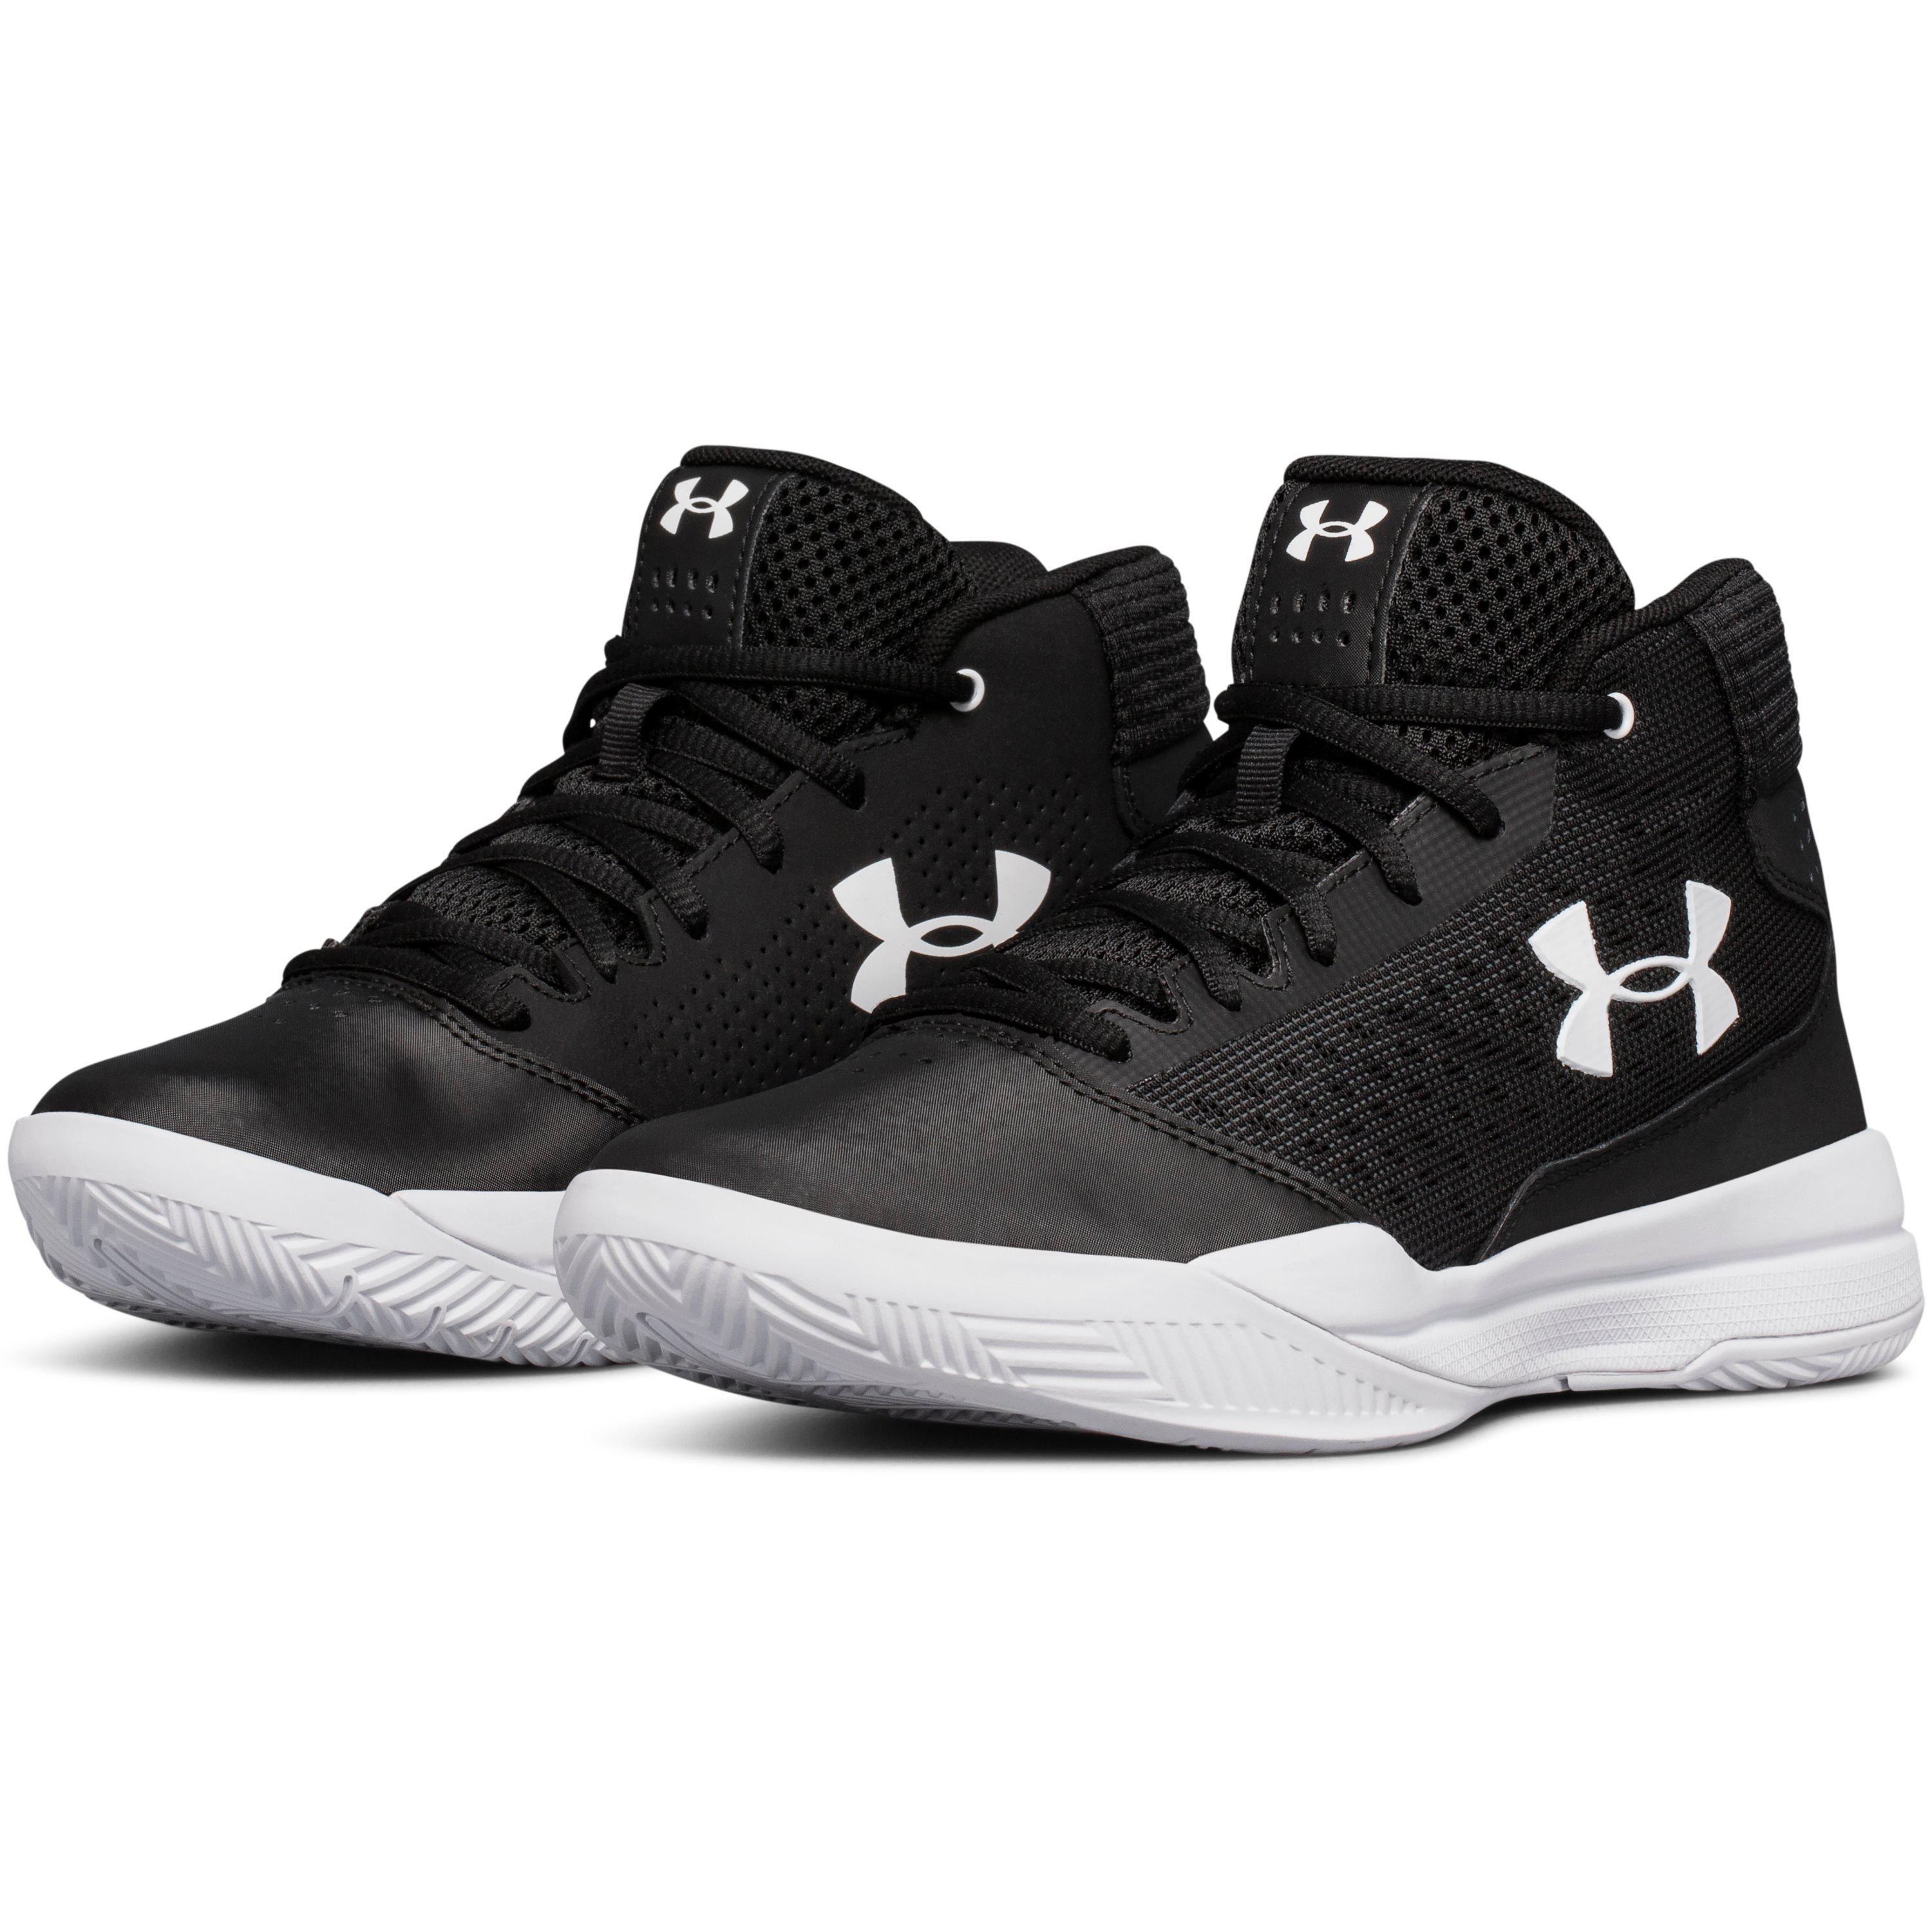 Under Armour Women's Jet 2017 Basketball Shoes in Black | Lyst